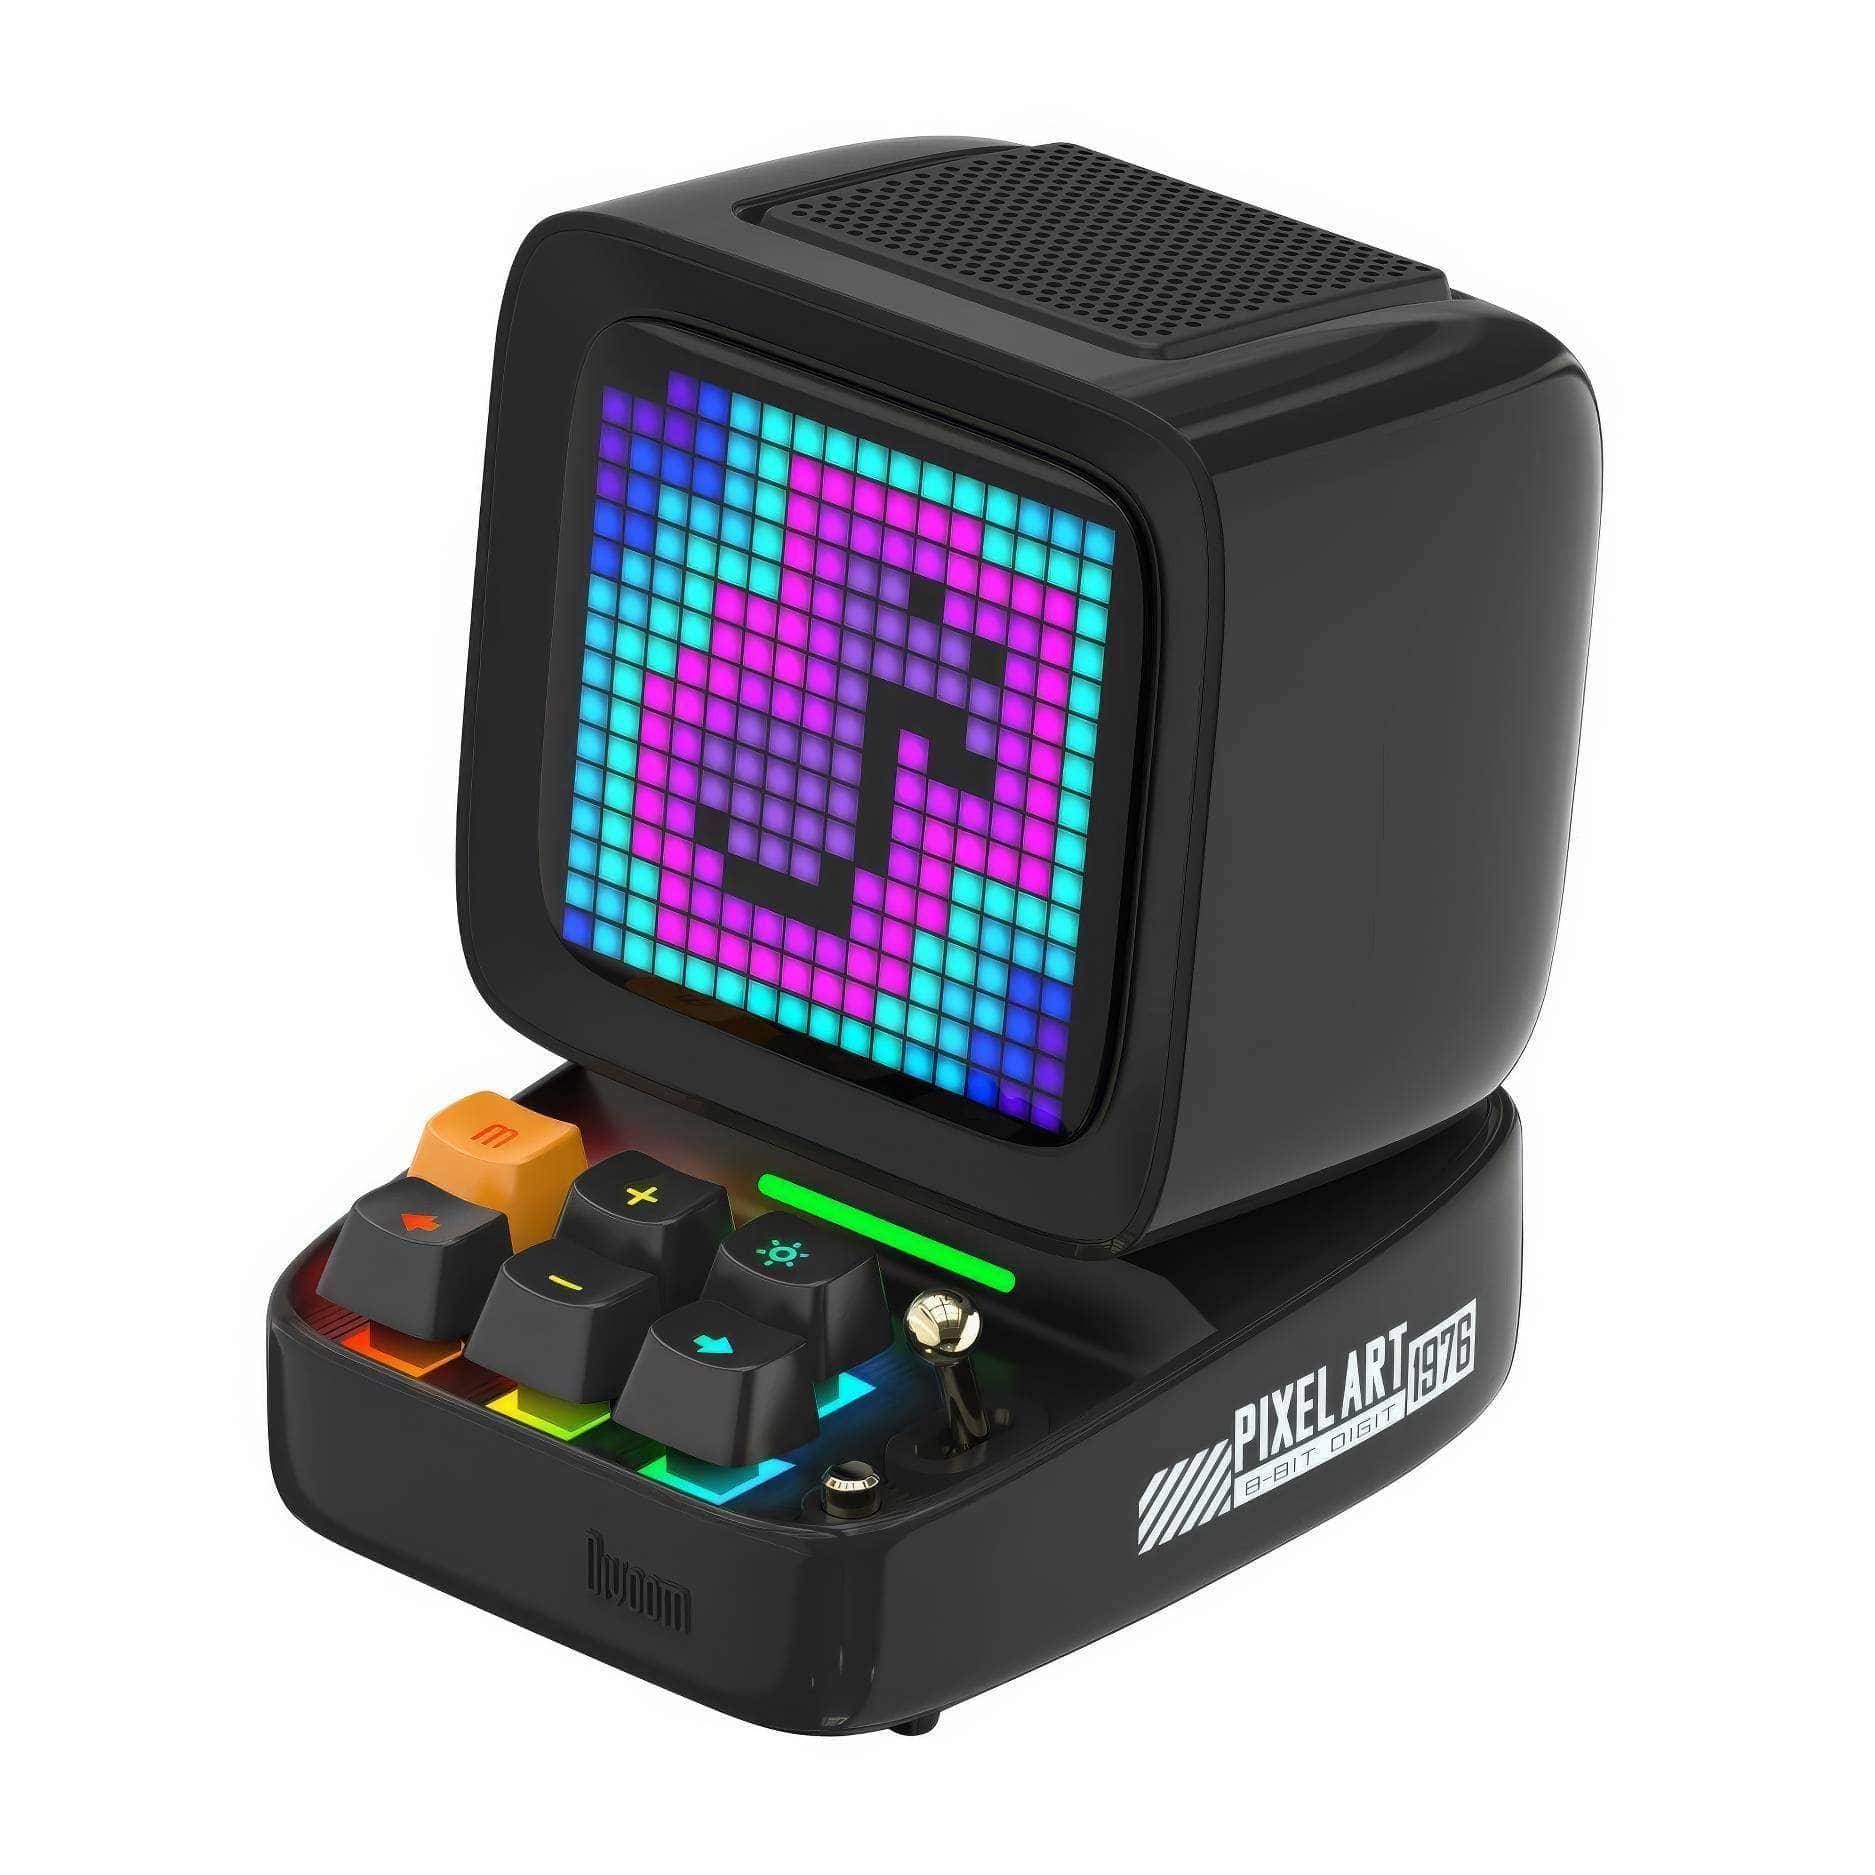 Divoom Ditoo Pixel Art Bluetooth Speaker - Wireless, 15W Output Power, Ideal for Gaming Room Setup with 16x16 LED App-Controlled Front Screen